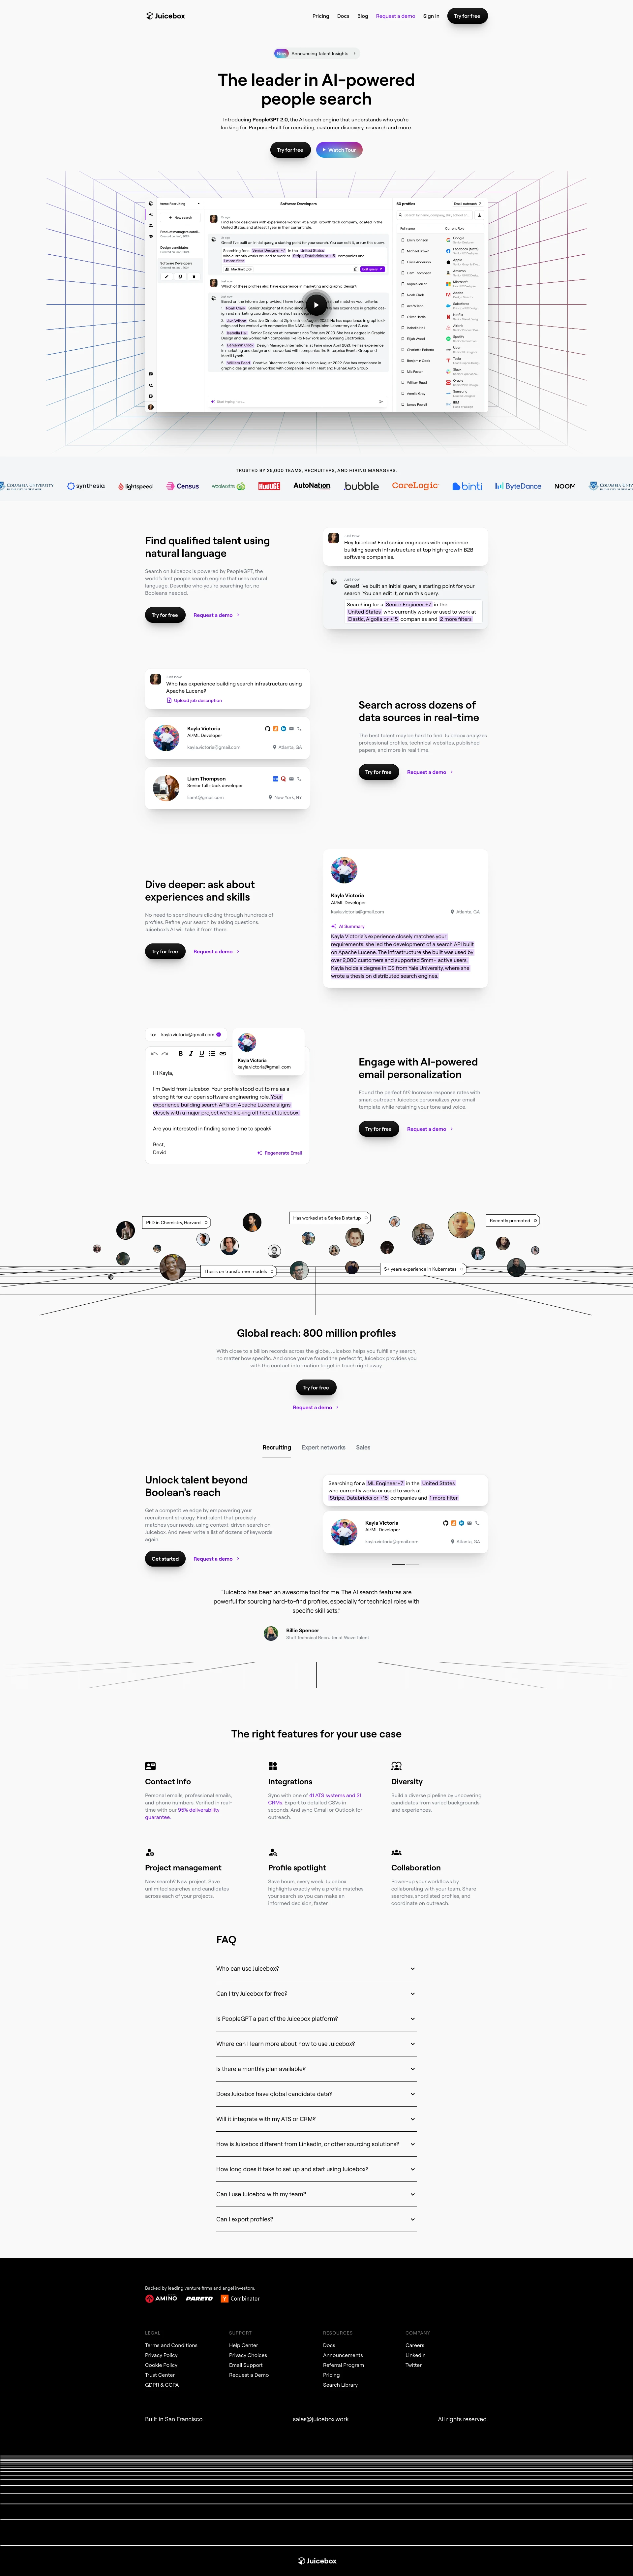 Juicebox Landing Page Example: The leader in AI-powered people search. Introducing PeopleGPT, the AI search engine that understands who you're looking for. Purpose-built for recruiting, customer discovery, research and more.